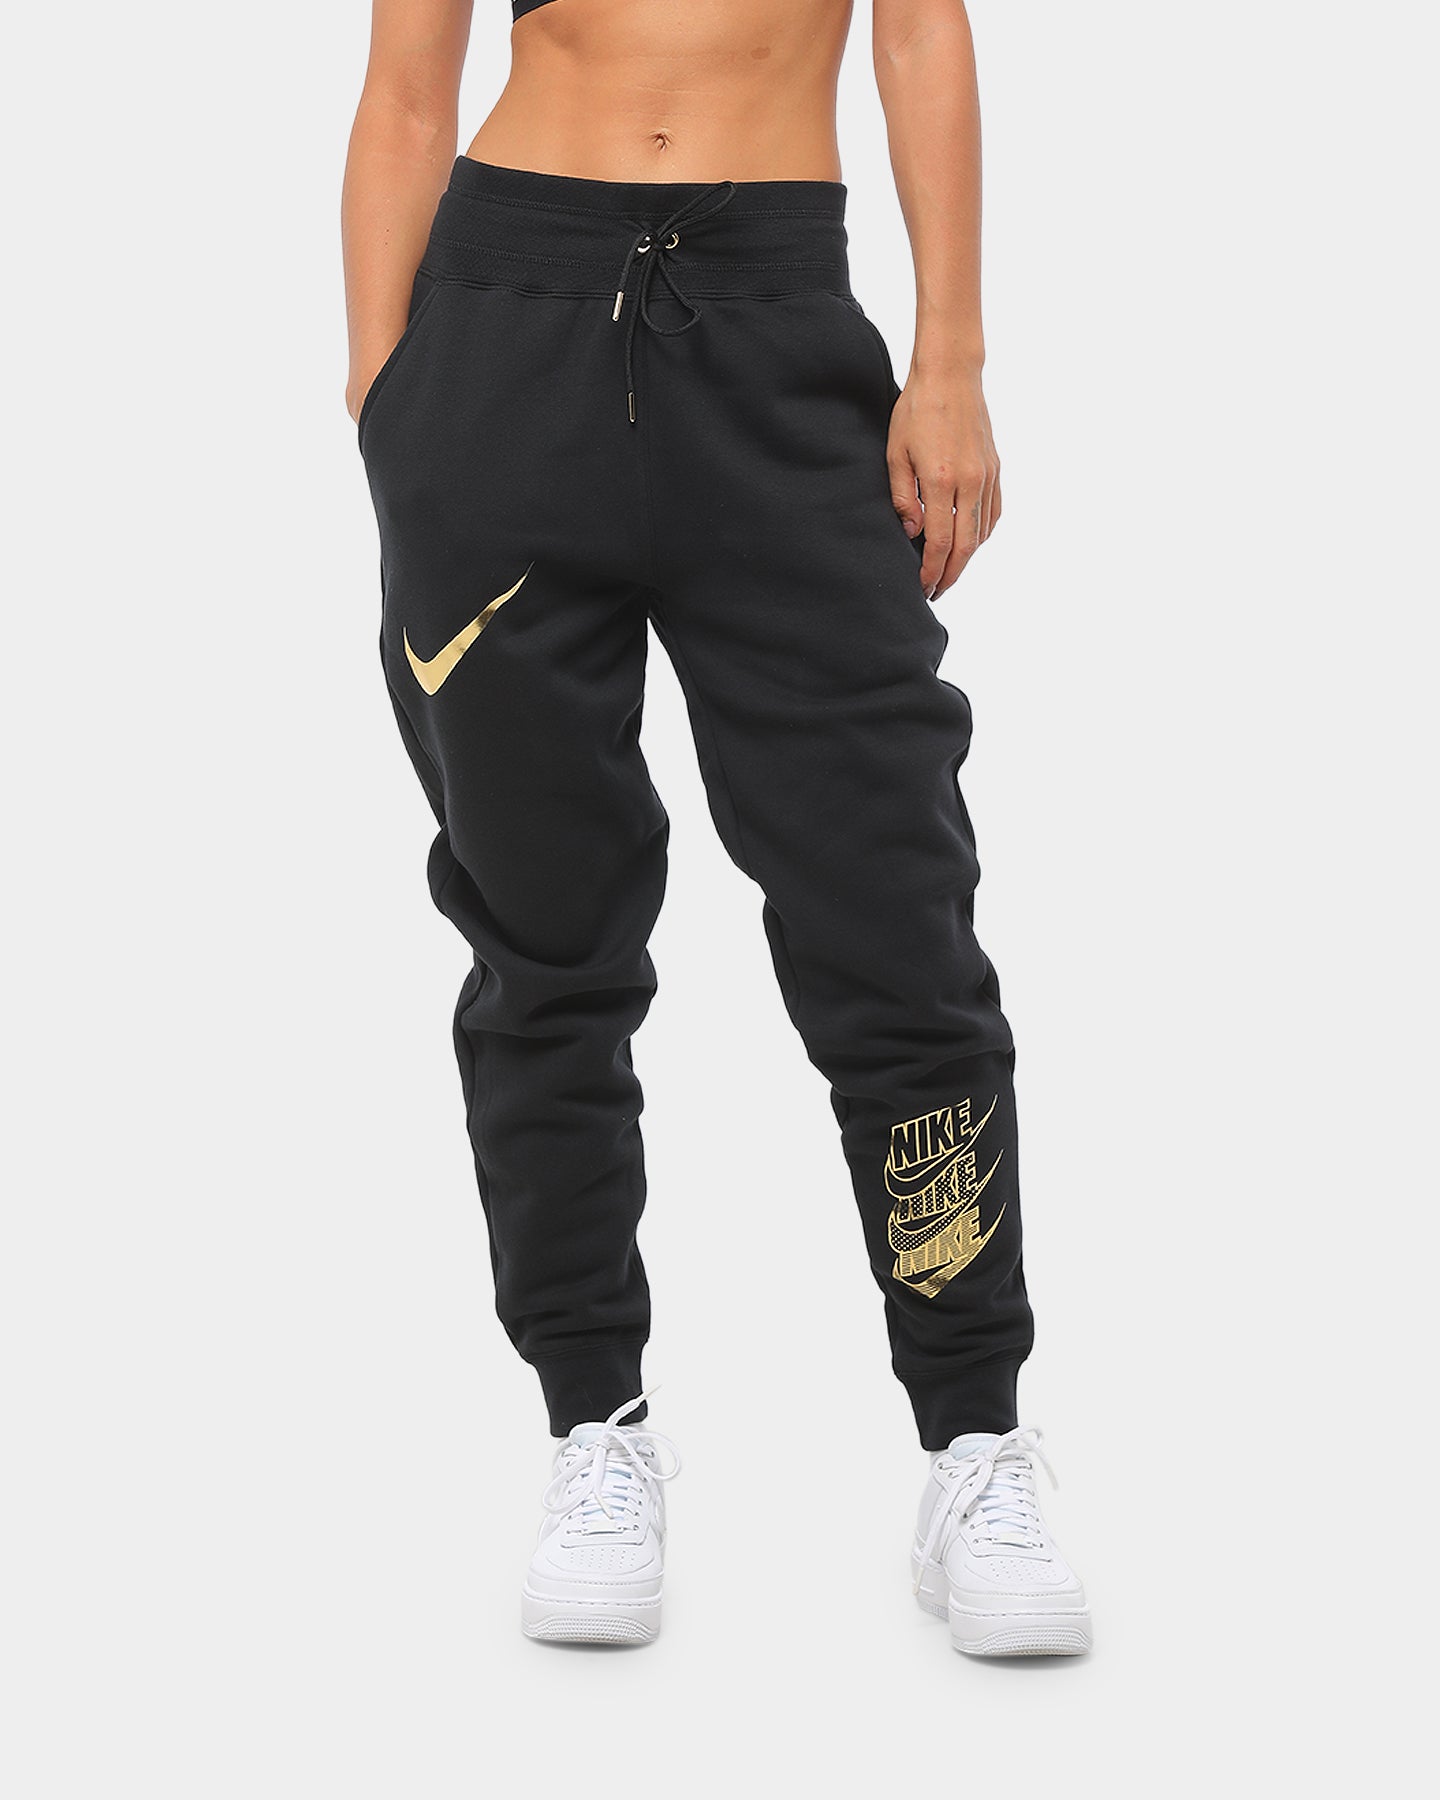 black and gold nike women's apparel